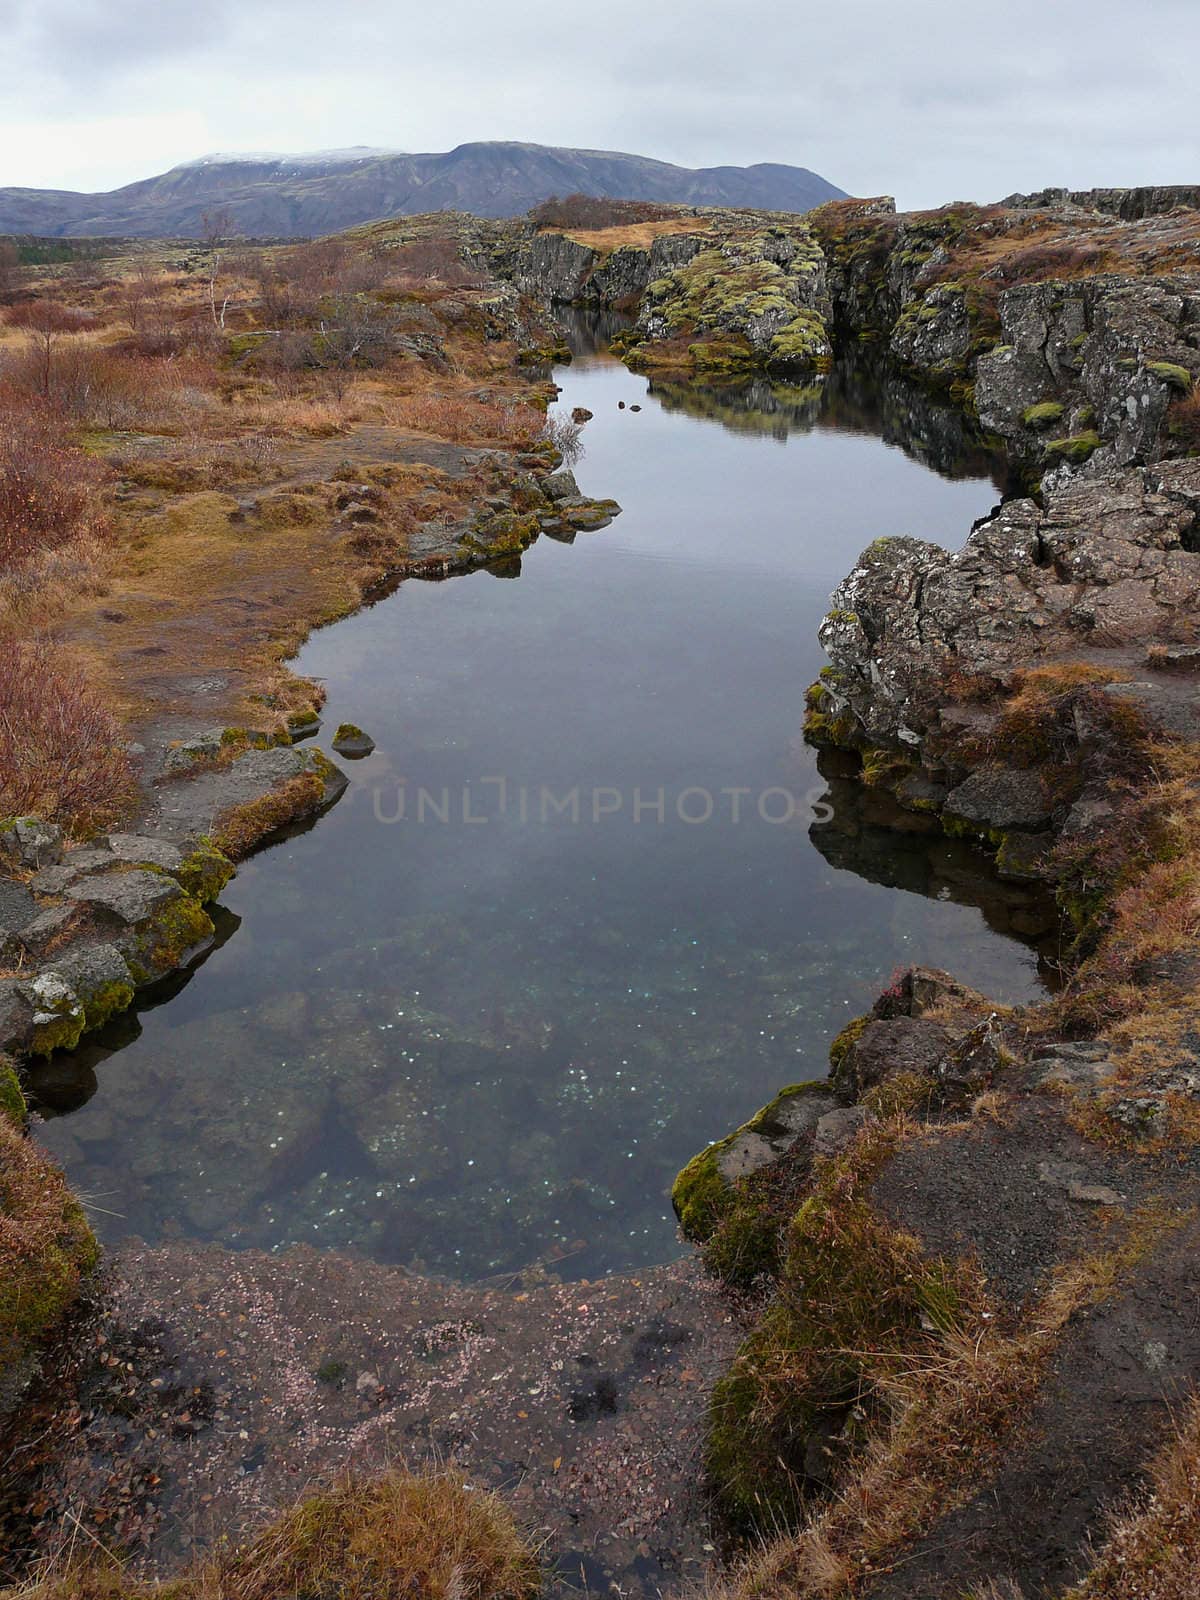 Thingvellir, a fissure in the earth's crust where the european and american continents slowly drift apart. It's also the place where the first Icelandic parliament seated.